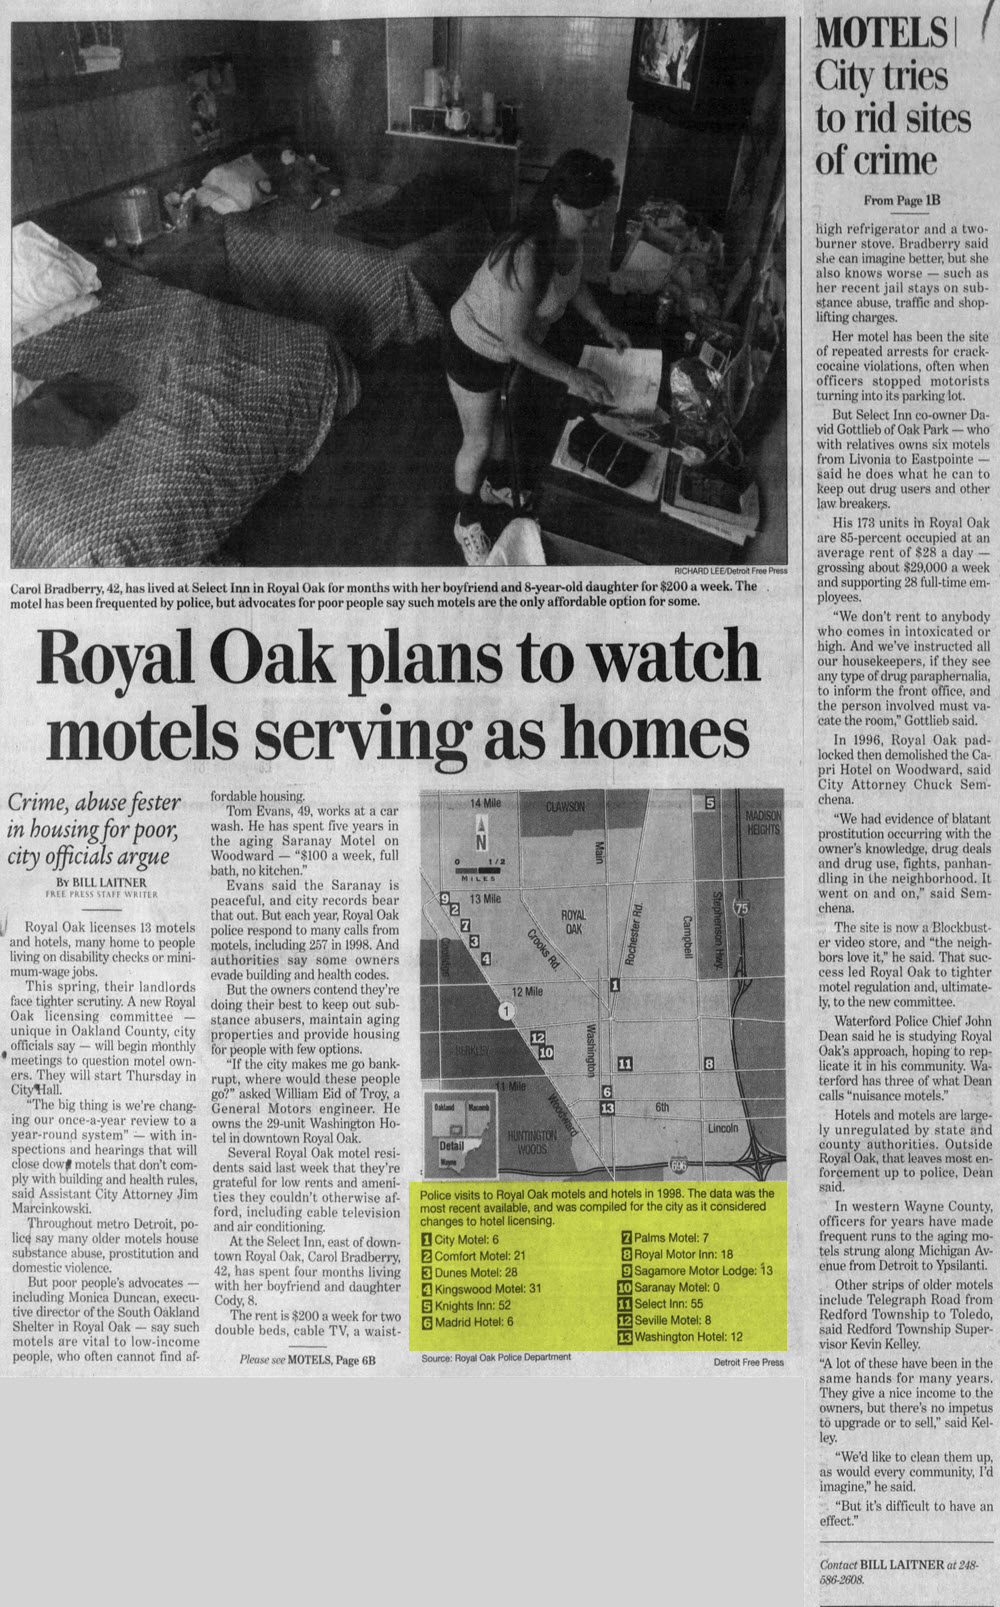 Kingswood Motel - June 2000 Article On Motel Situation